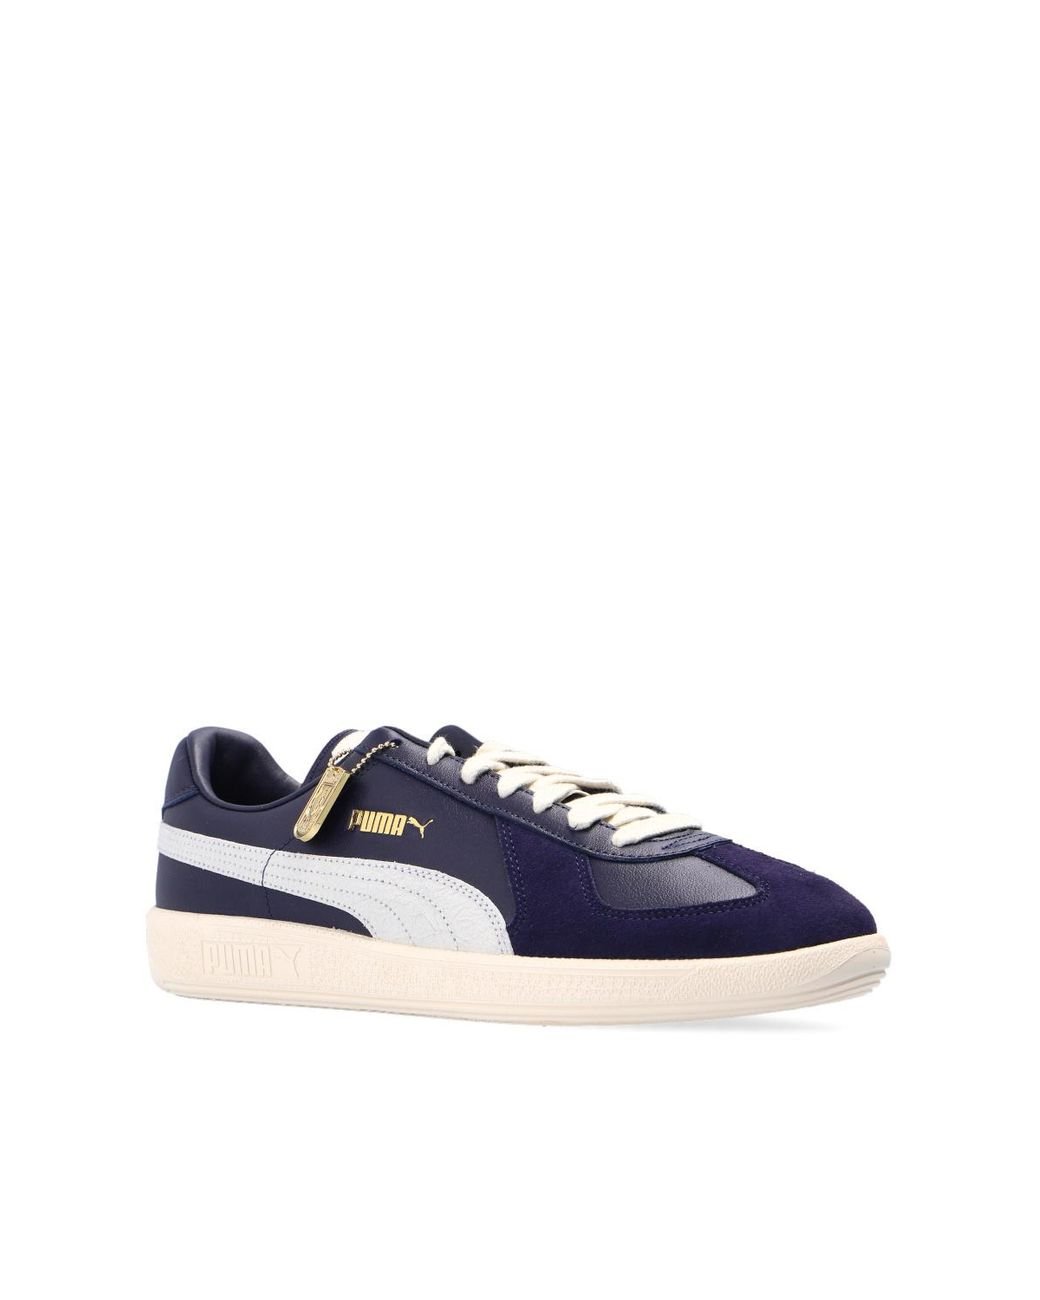 PUMA Leather 'the Rudolf Dassler Legacy' Collection in Navy Blue (Blue) for  Men | Lyst